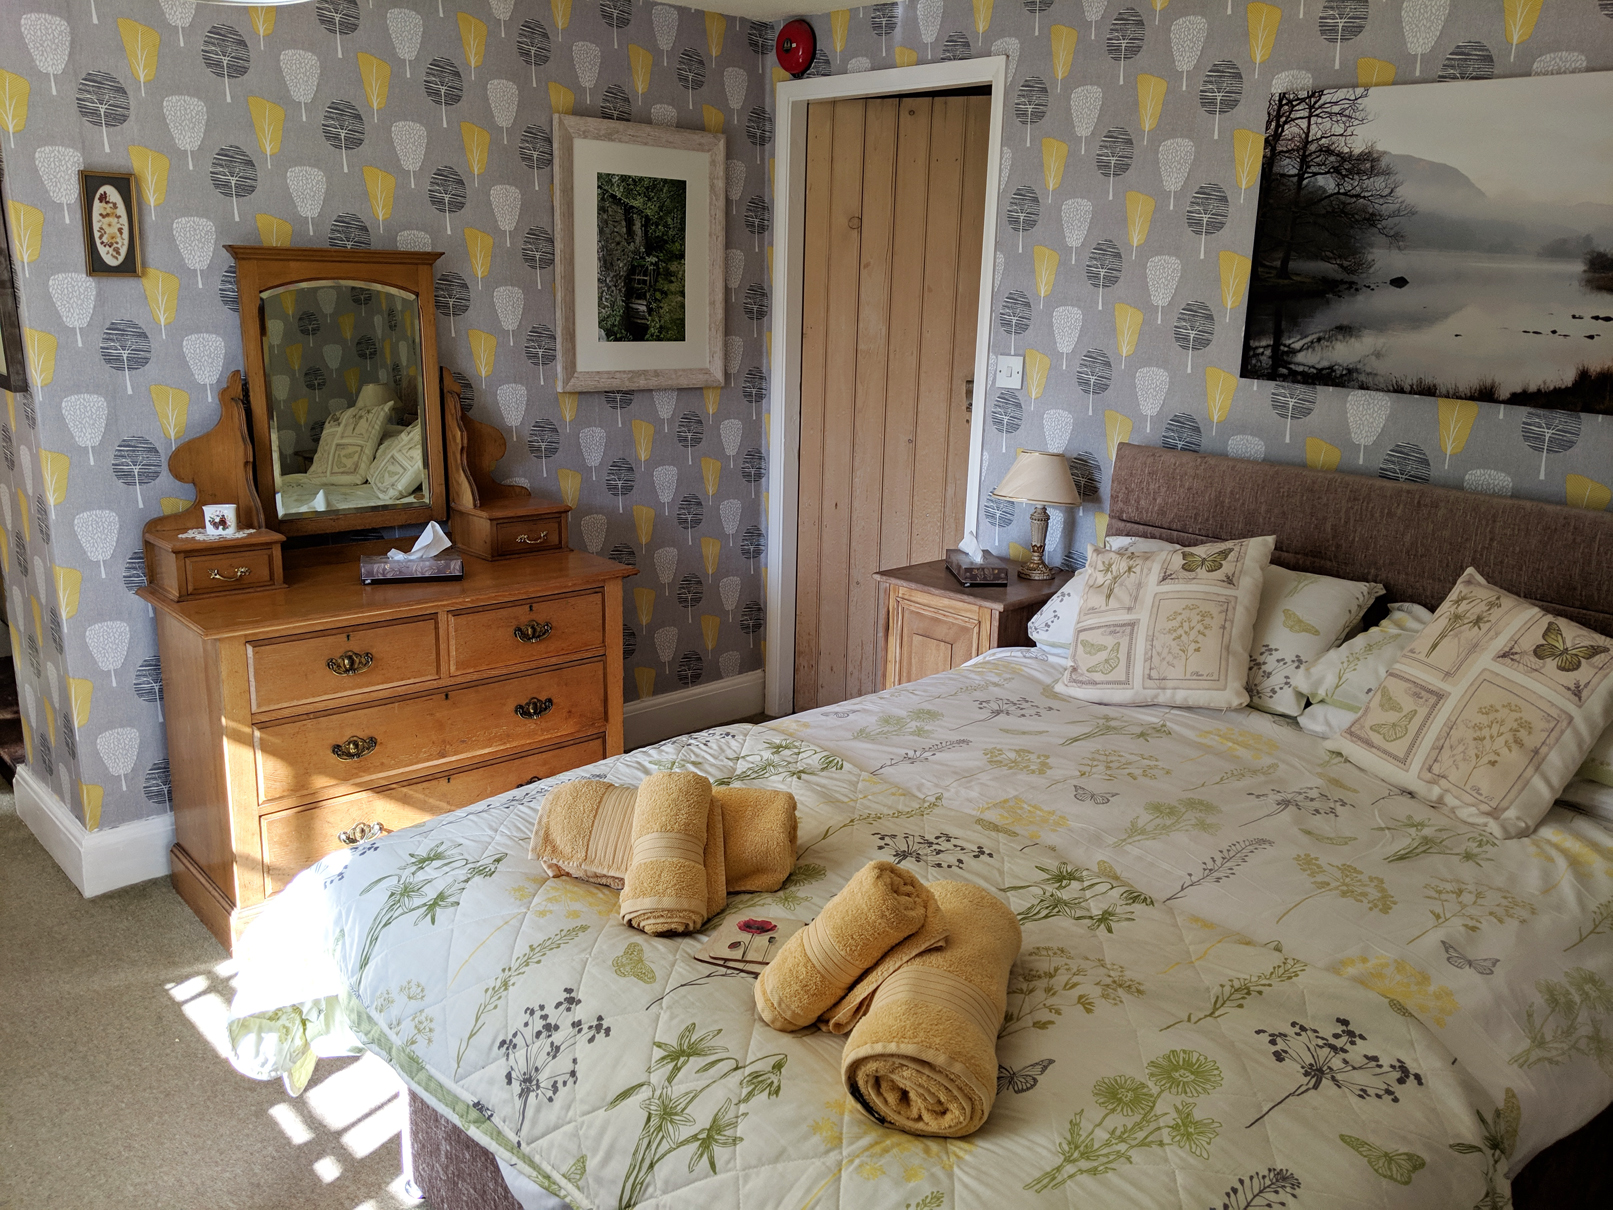 Betty Fold Self Catering Holidays in the Lake District